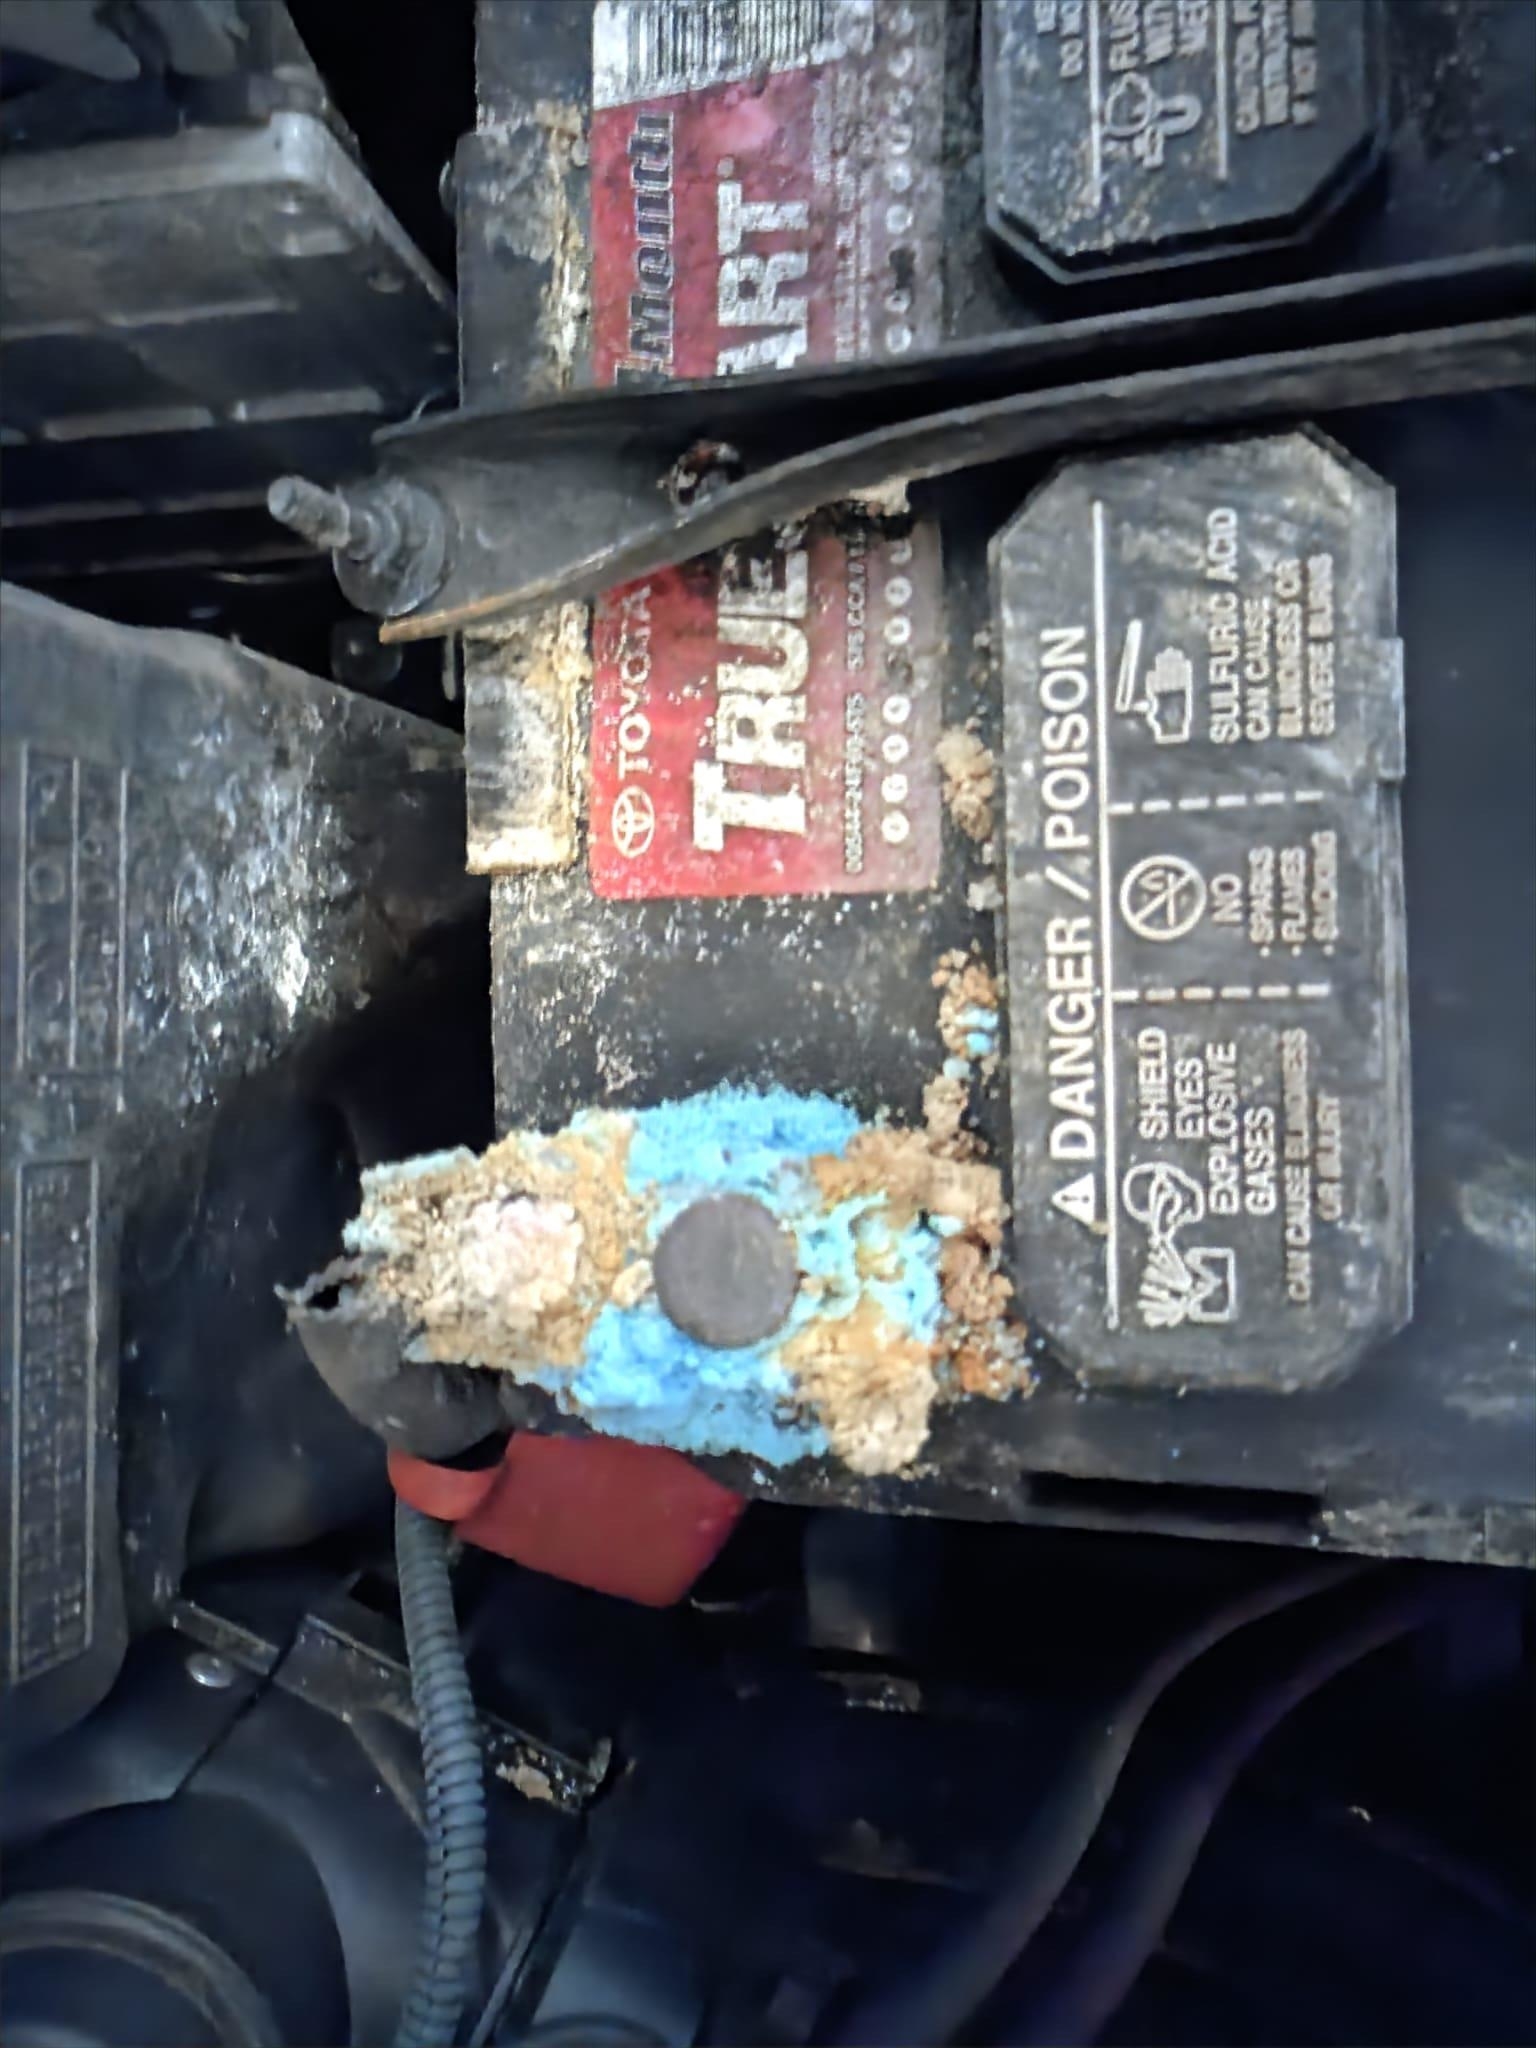 Car battery with significant corrosion on the terminal